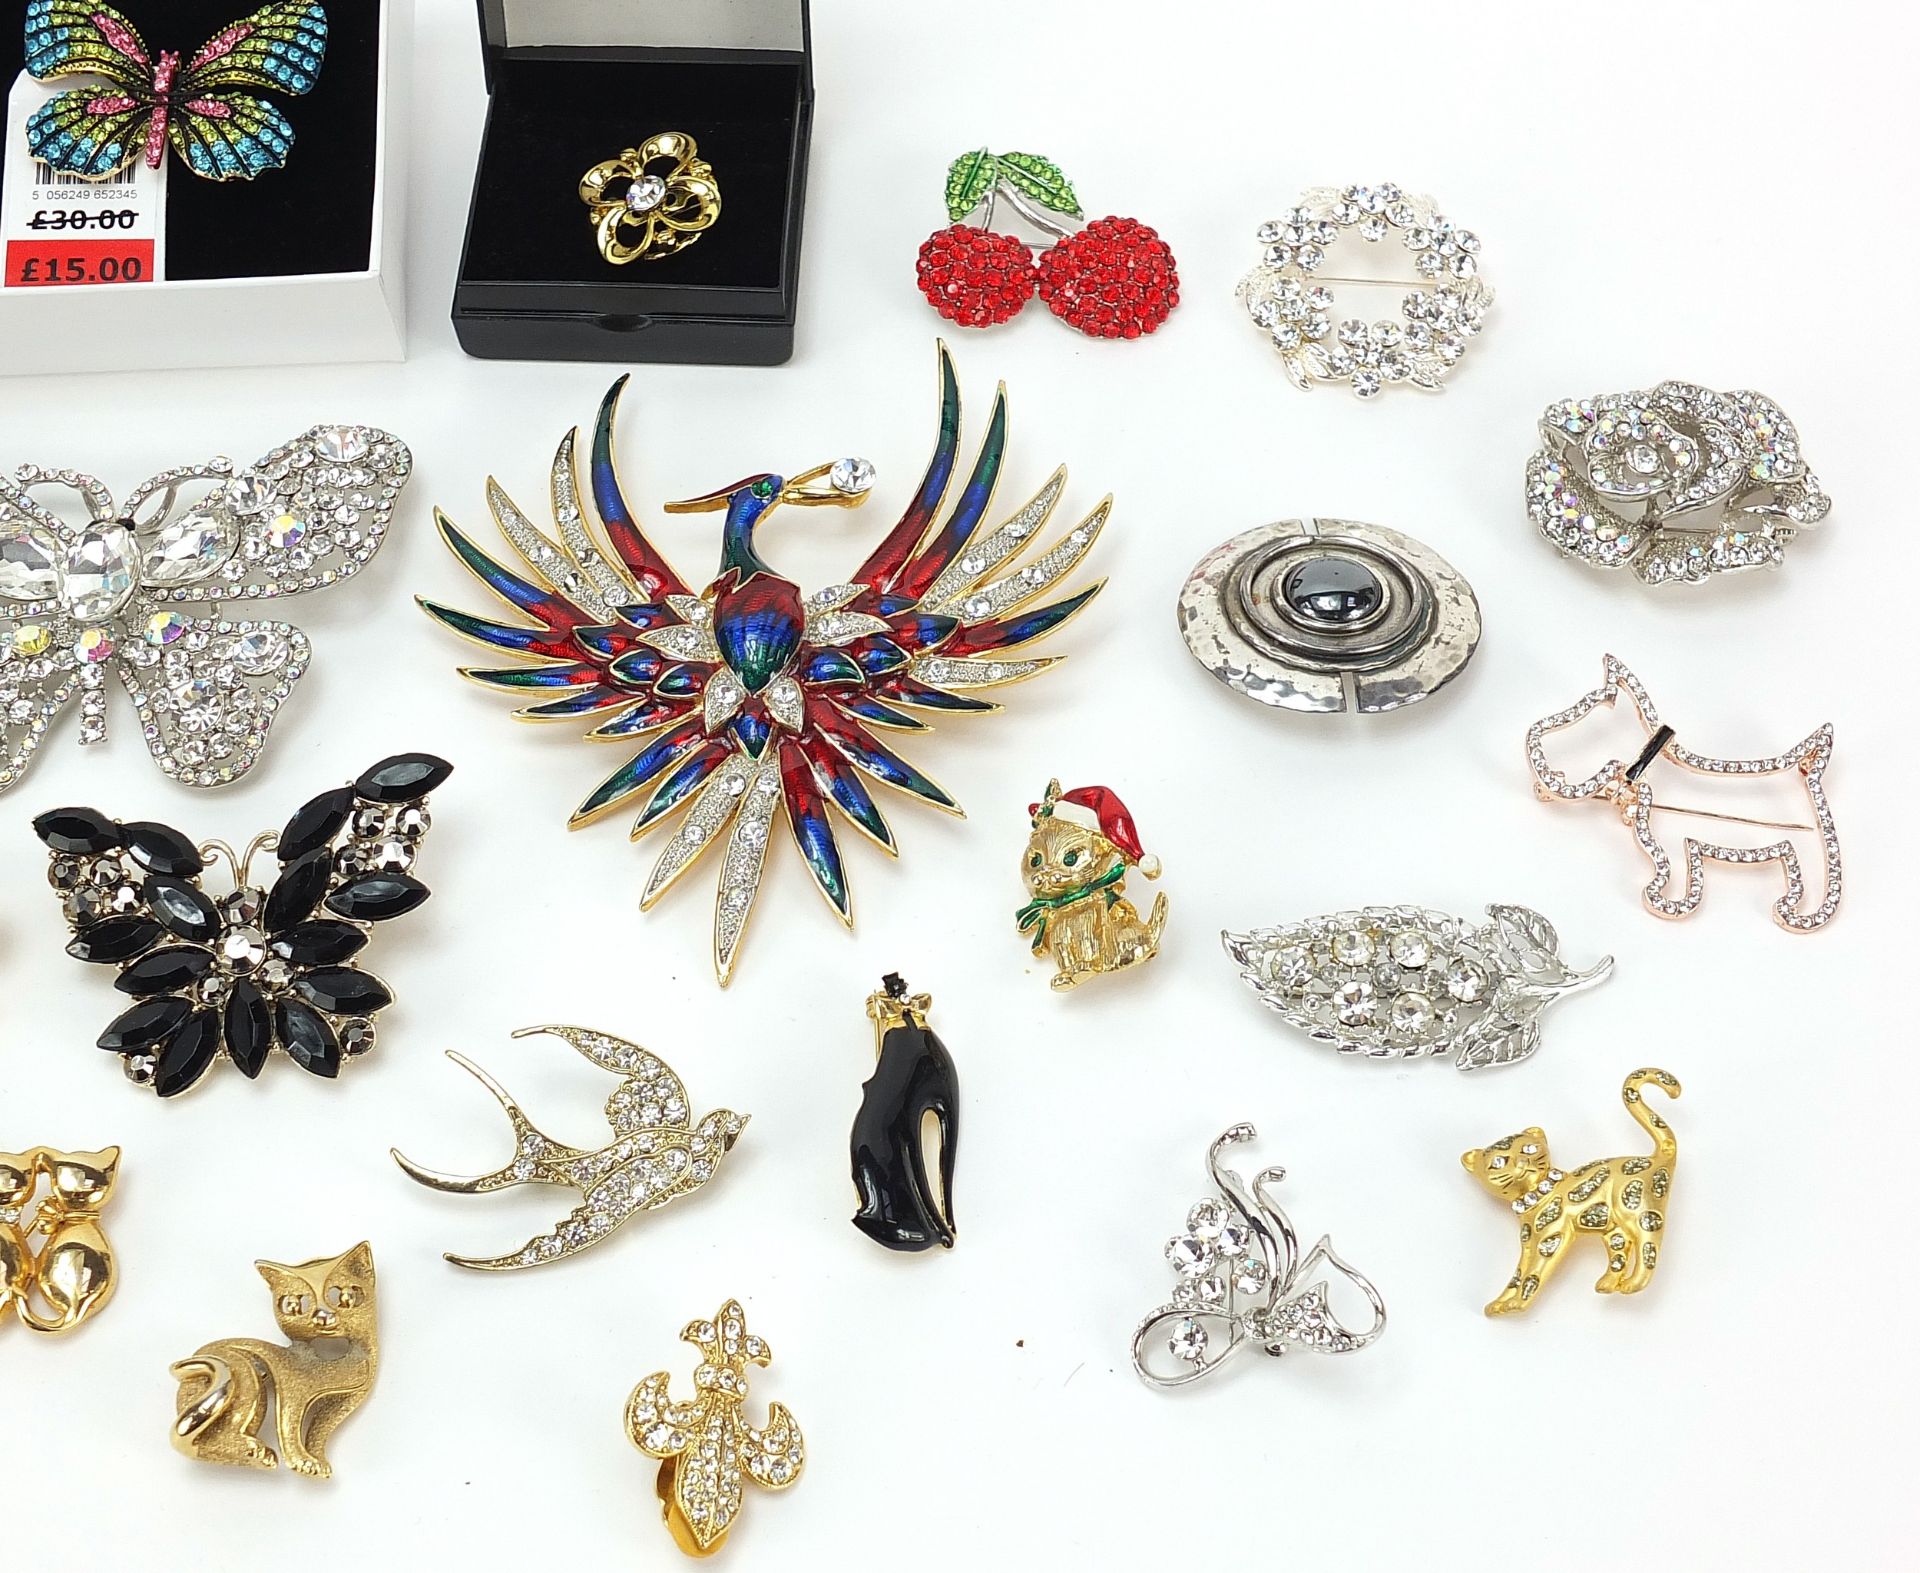 Collection of costume jewellery brooches, including some jeweled and enamel animals - Image 4 of 5